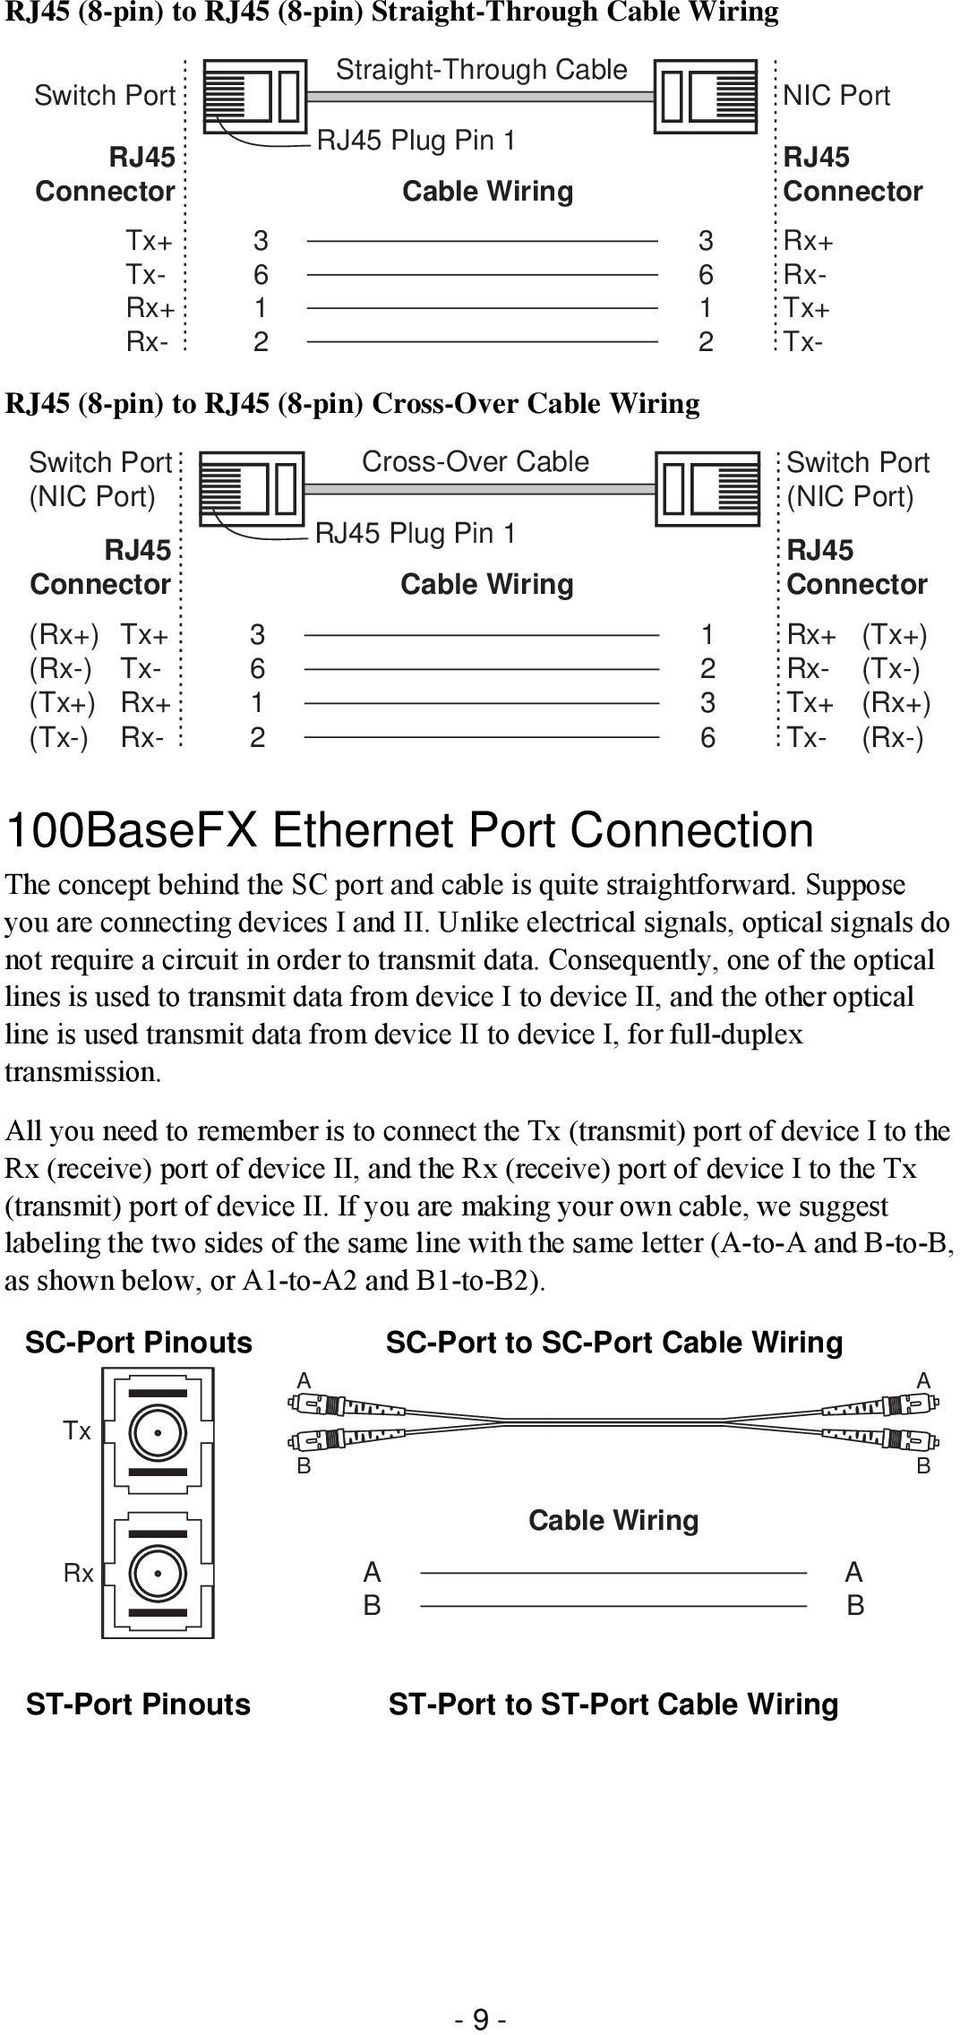 3 2 6 Switch Port (NIC Port) RJ45 Connector Rx+ Rx- Tx+ Tx- (Tx+) (Tx-) (Rx+) (Rx-) 100BaseFX Ethernet Port Connection The concept behind the SC port and cable is quite straightforward.